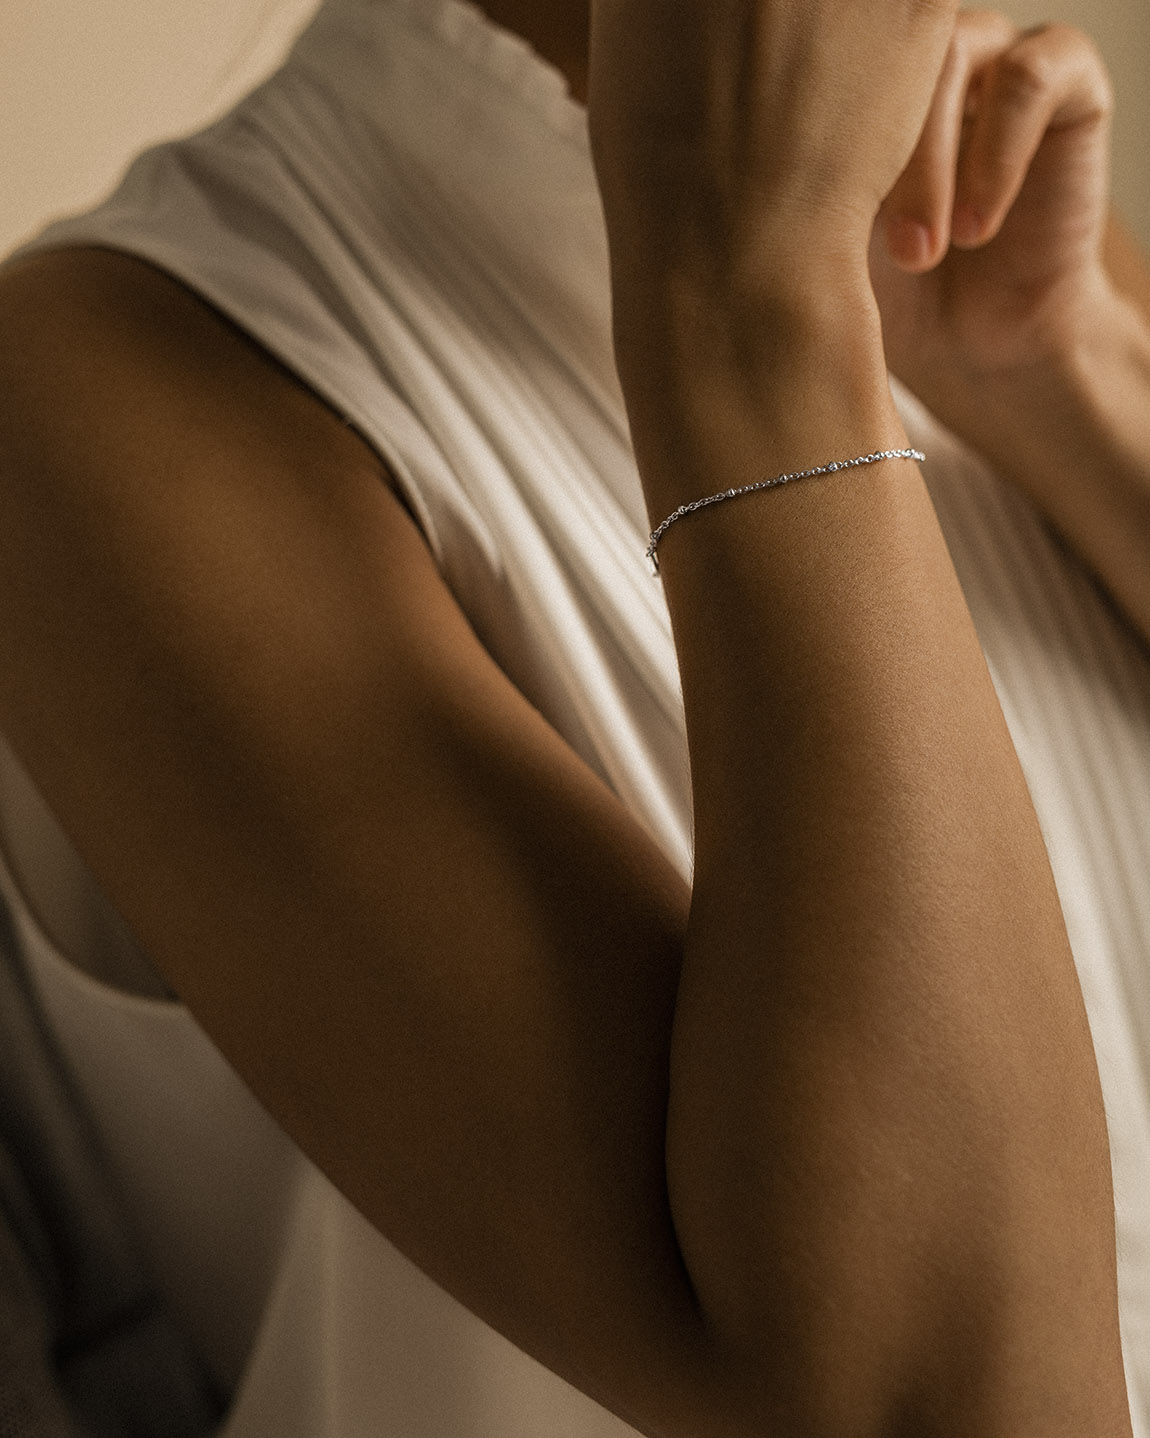 BLOMDAHL: Conscious jewellery that makes you feel good, every day